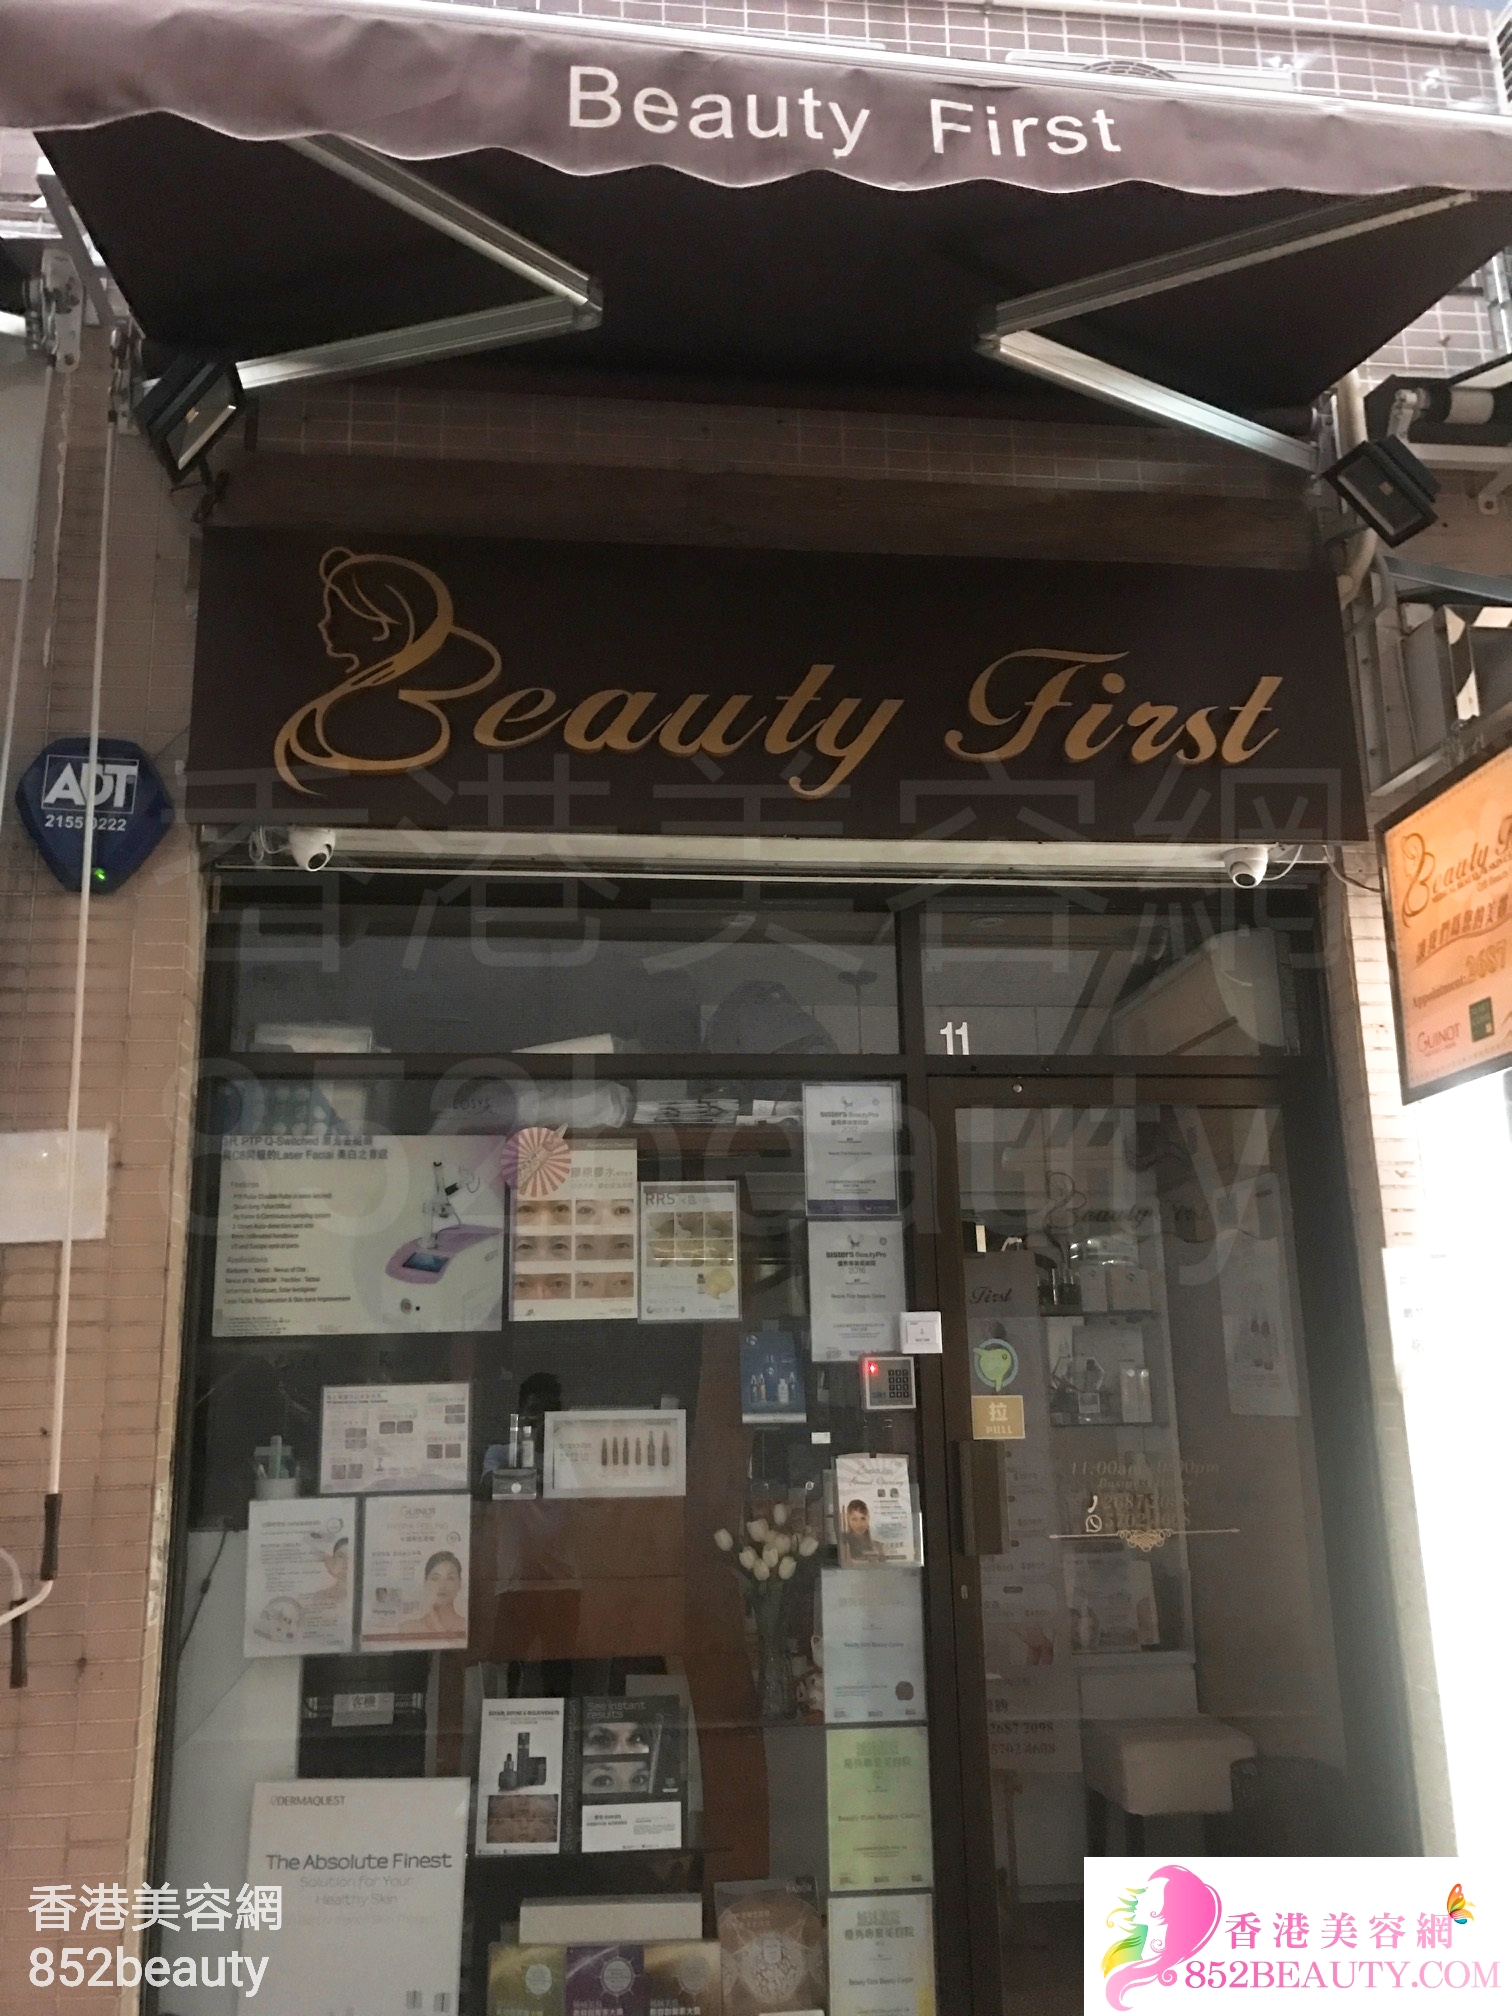 Hand and foot care: Beauty First (美豐花園)